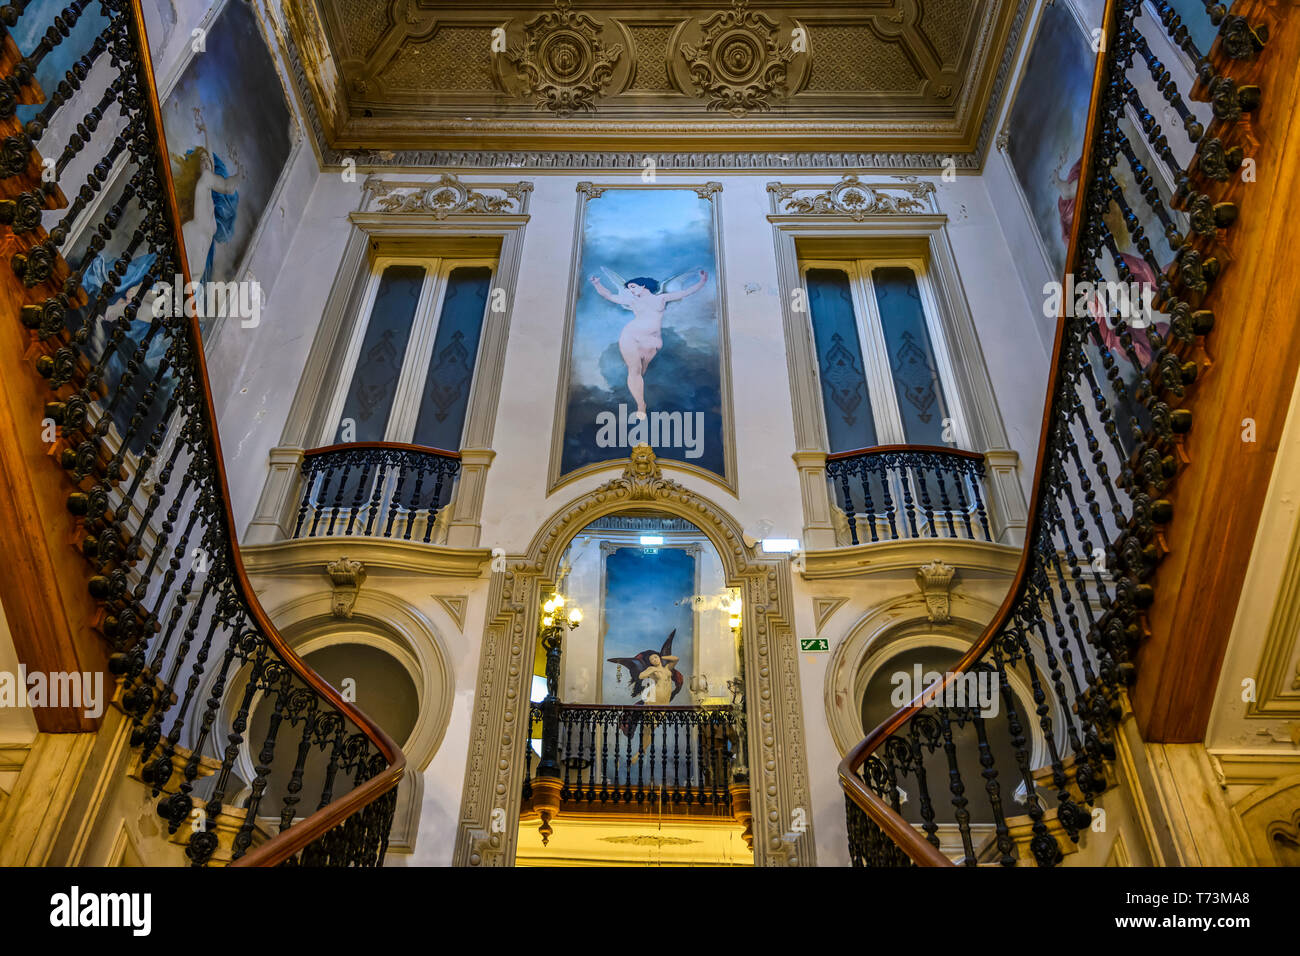 Interior of a building with artwork and decorative stair railings; Lisbon, Lisboa Region, Portugal Stock Photo